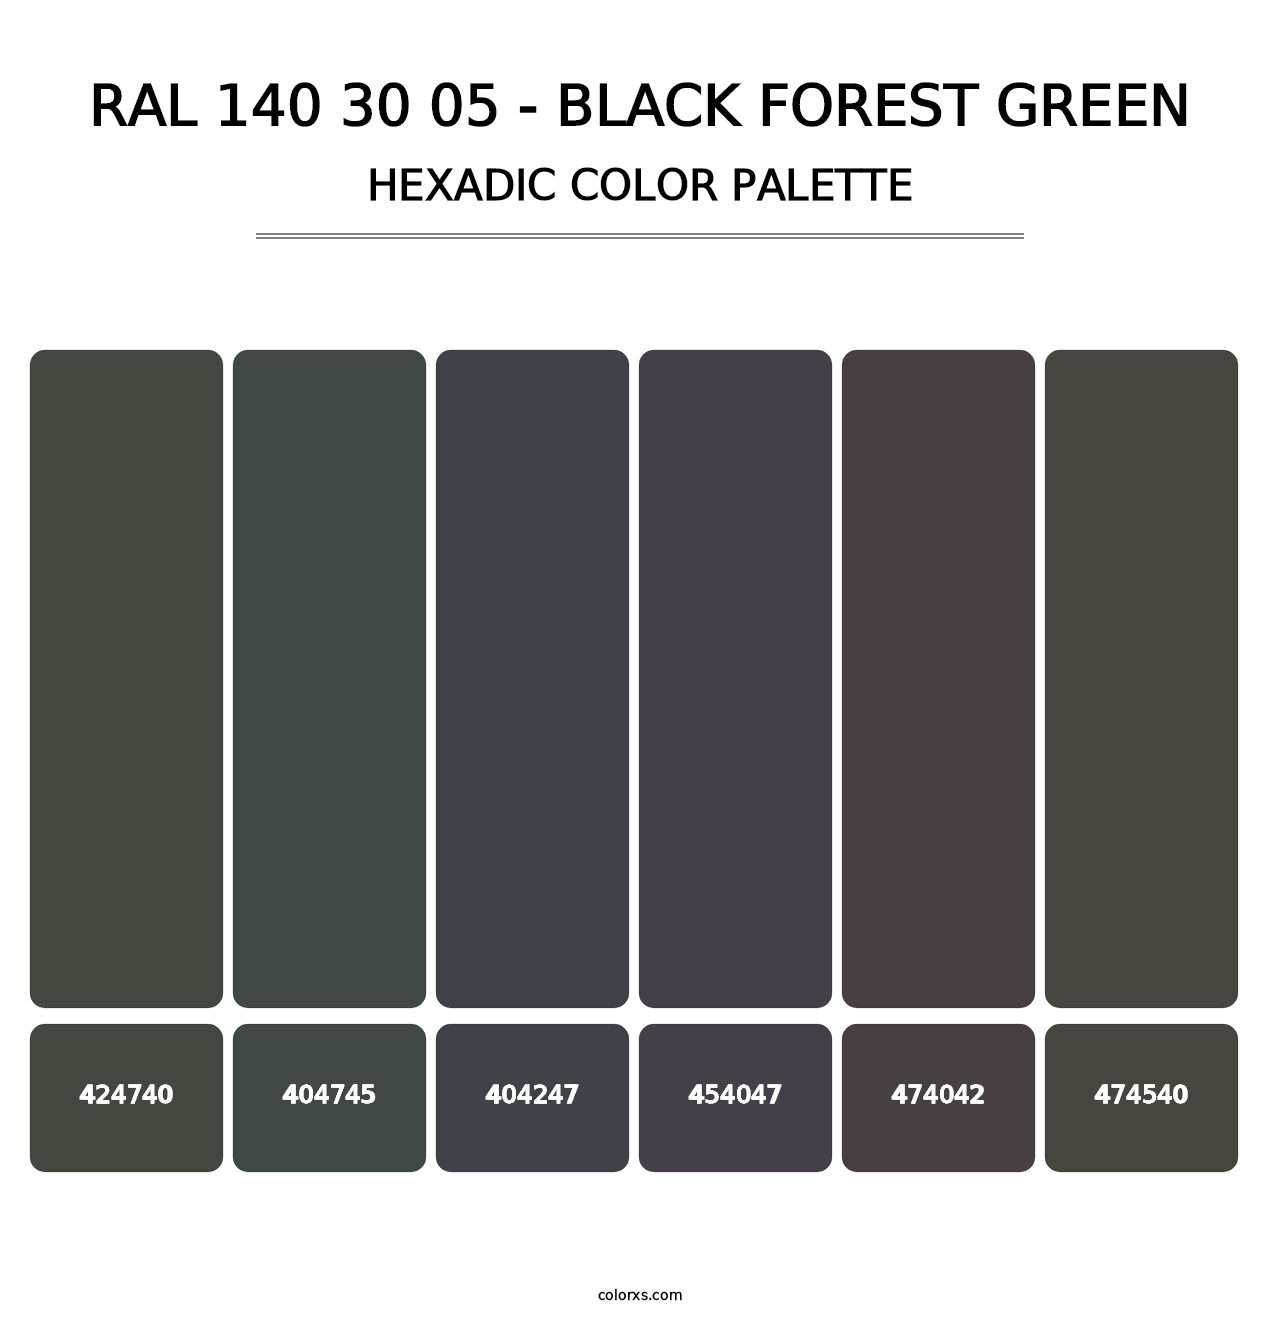 RAL 140 30 05 - Black Forest Green - Hexadic Color Palette